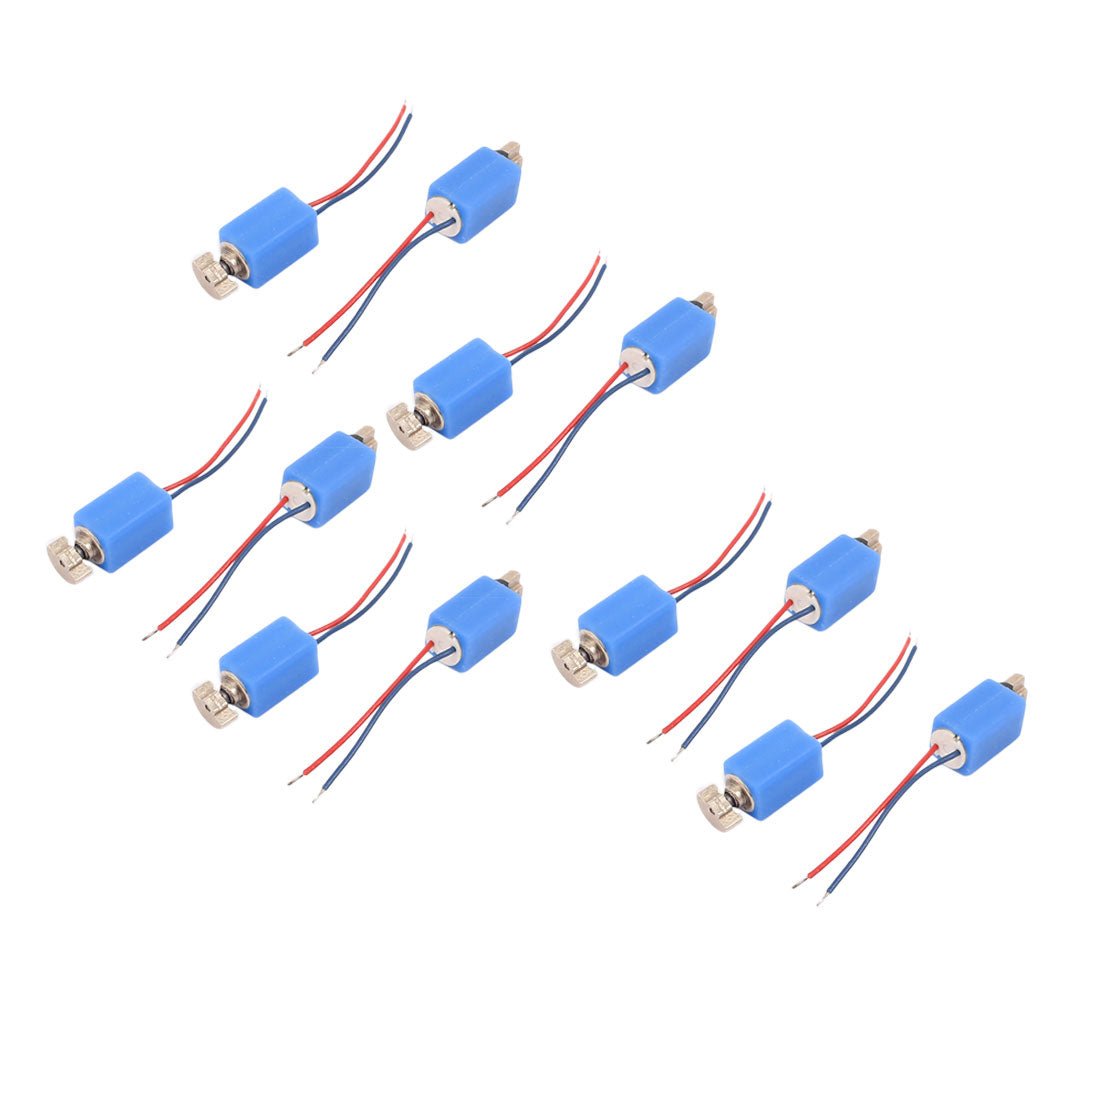 uxcell Uxcell 12 Pcs DC 3V 4 x 8mm 3500RPM Mini Vibration Motor Blue for Cell Phone